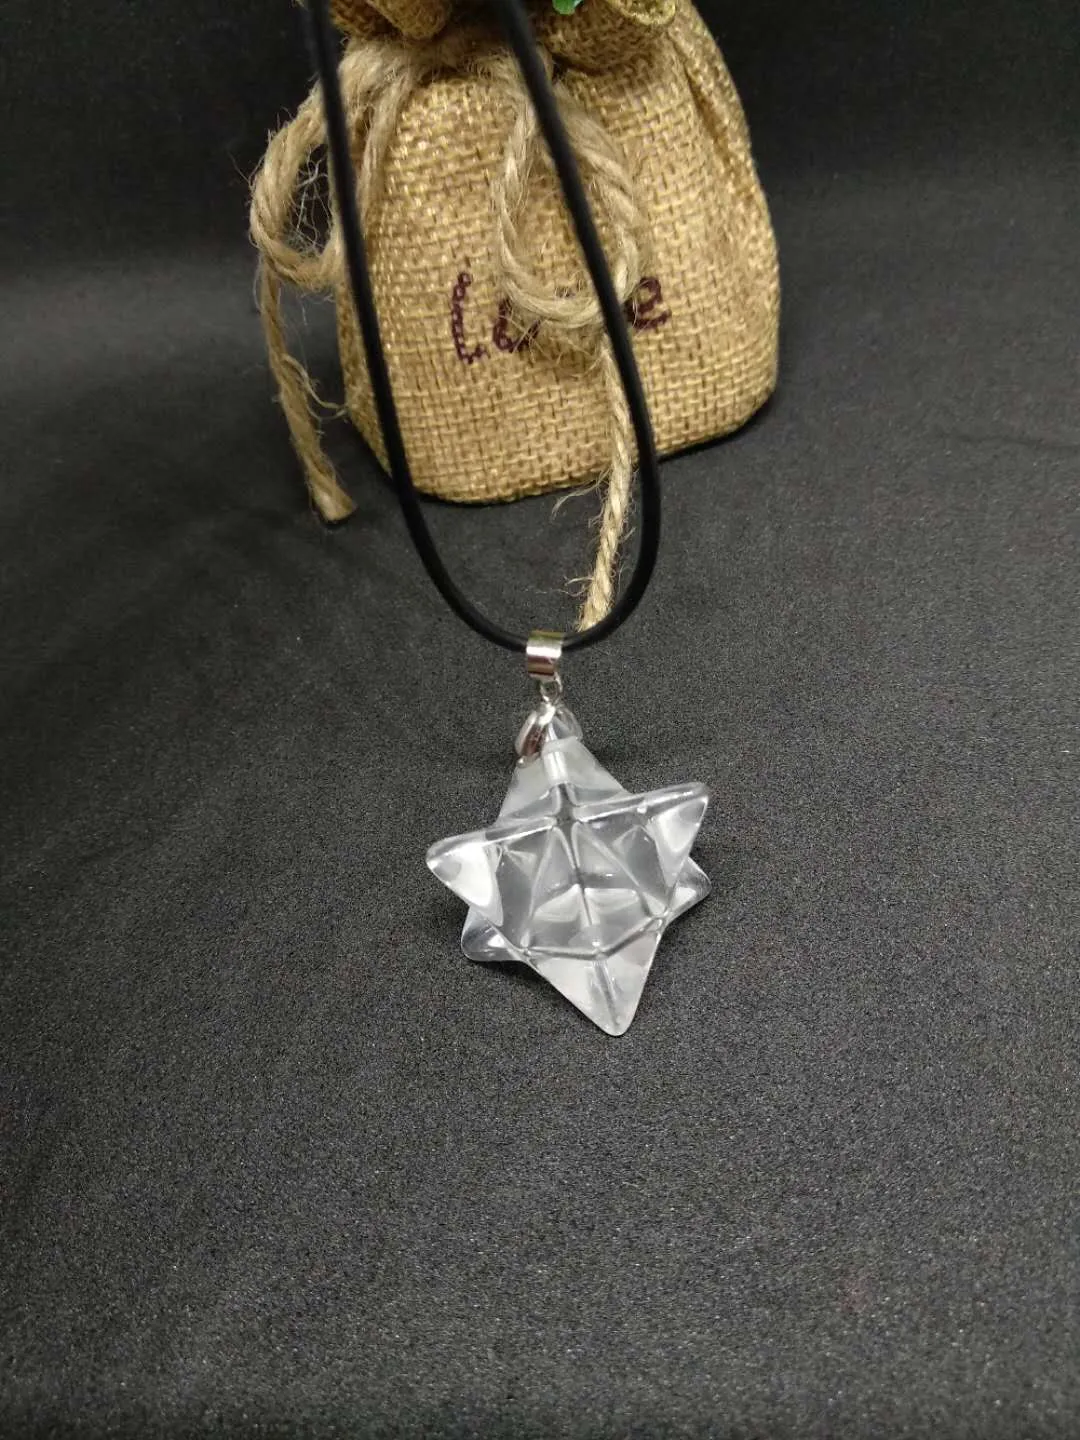 Natural White Quartz crystal Stone Merkaba Pendant Necklace Healing natural stones and minerals